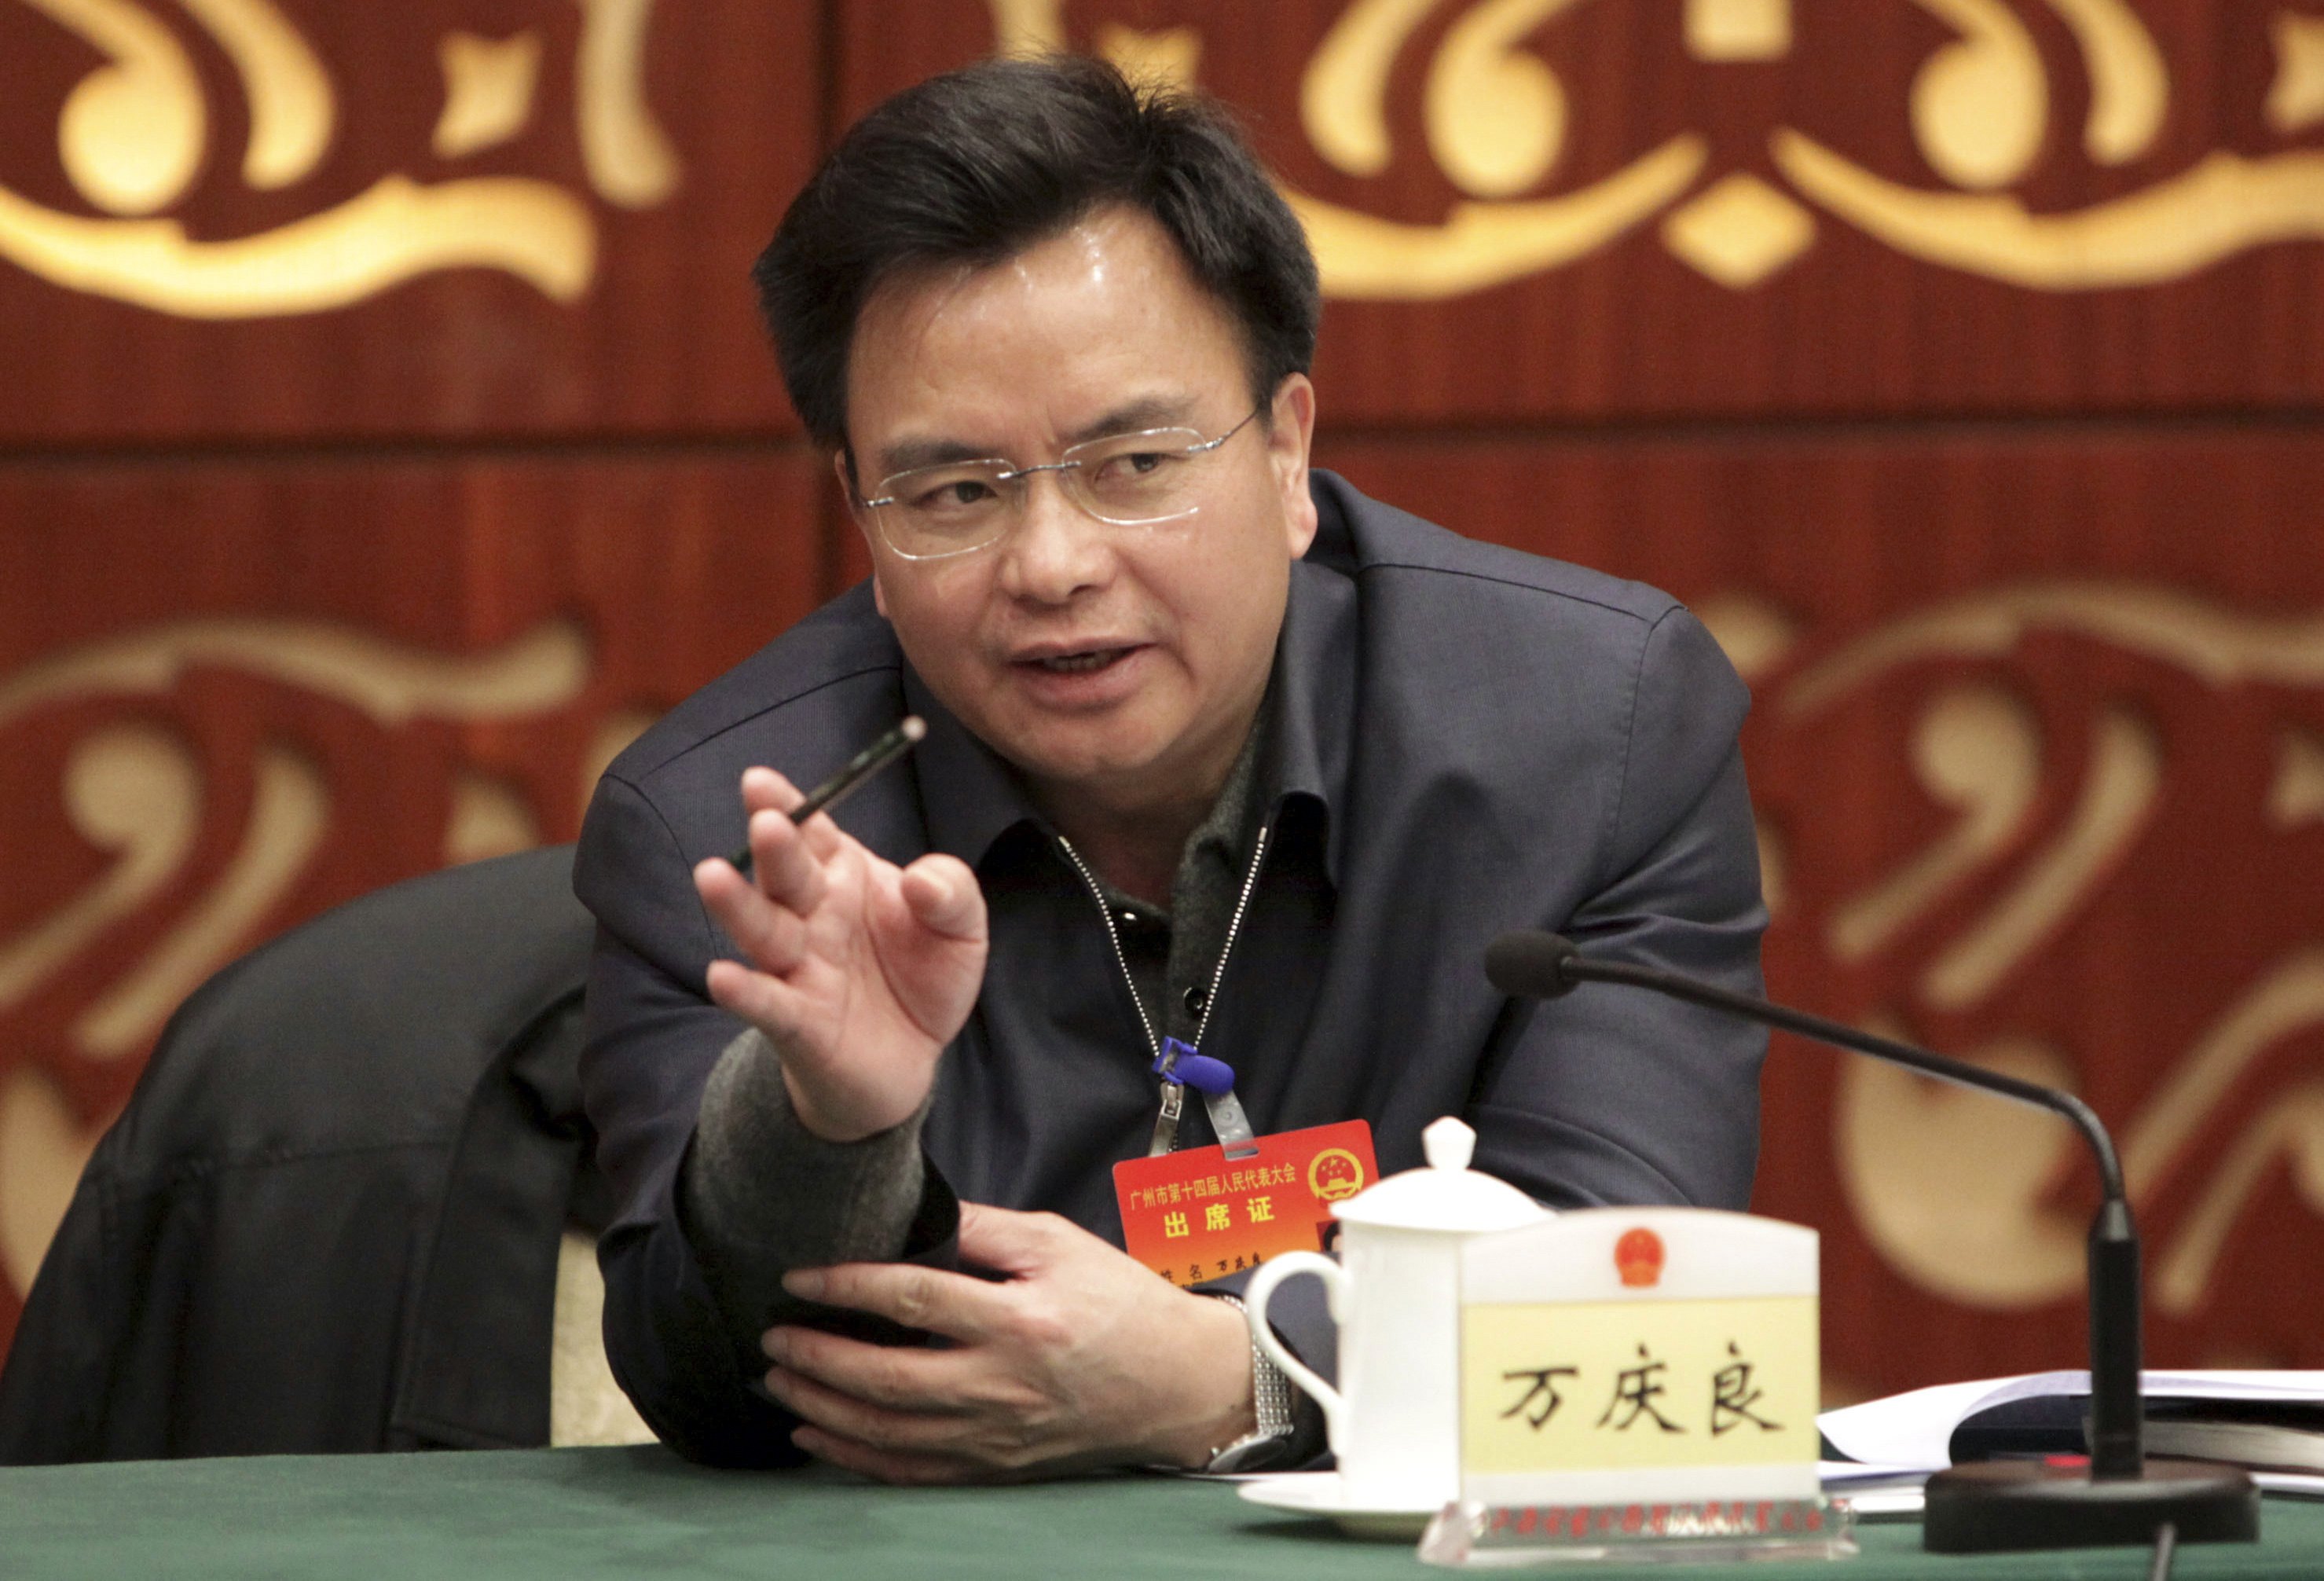 Wan Qingliang, the disgraced former Communist Party secretary of Guangzhou, was once considered a rising star in the party. Photo: Reuters